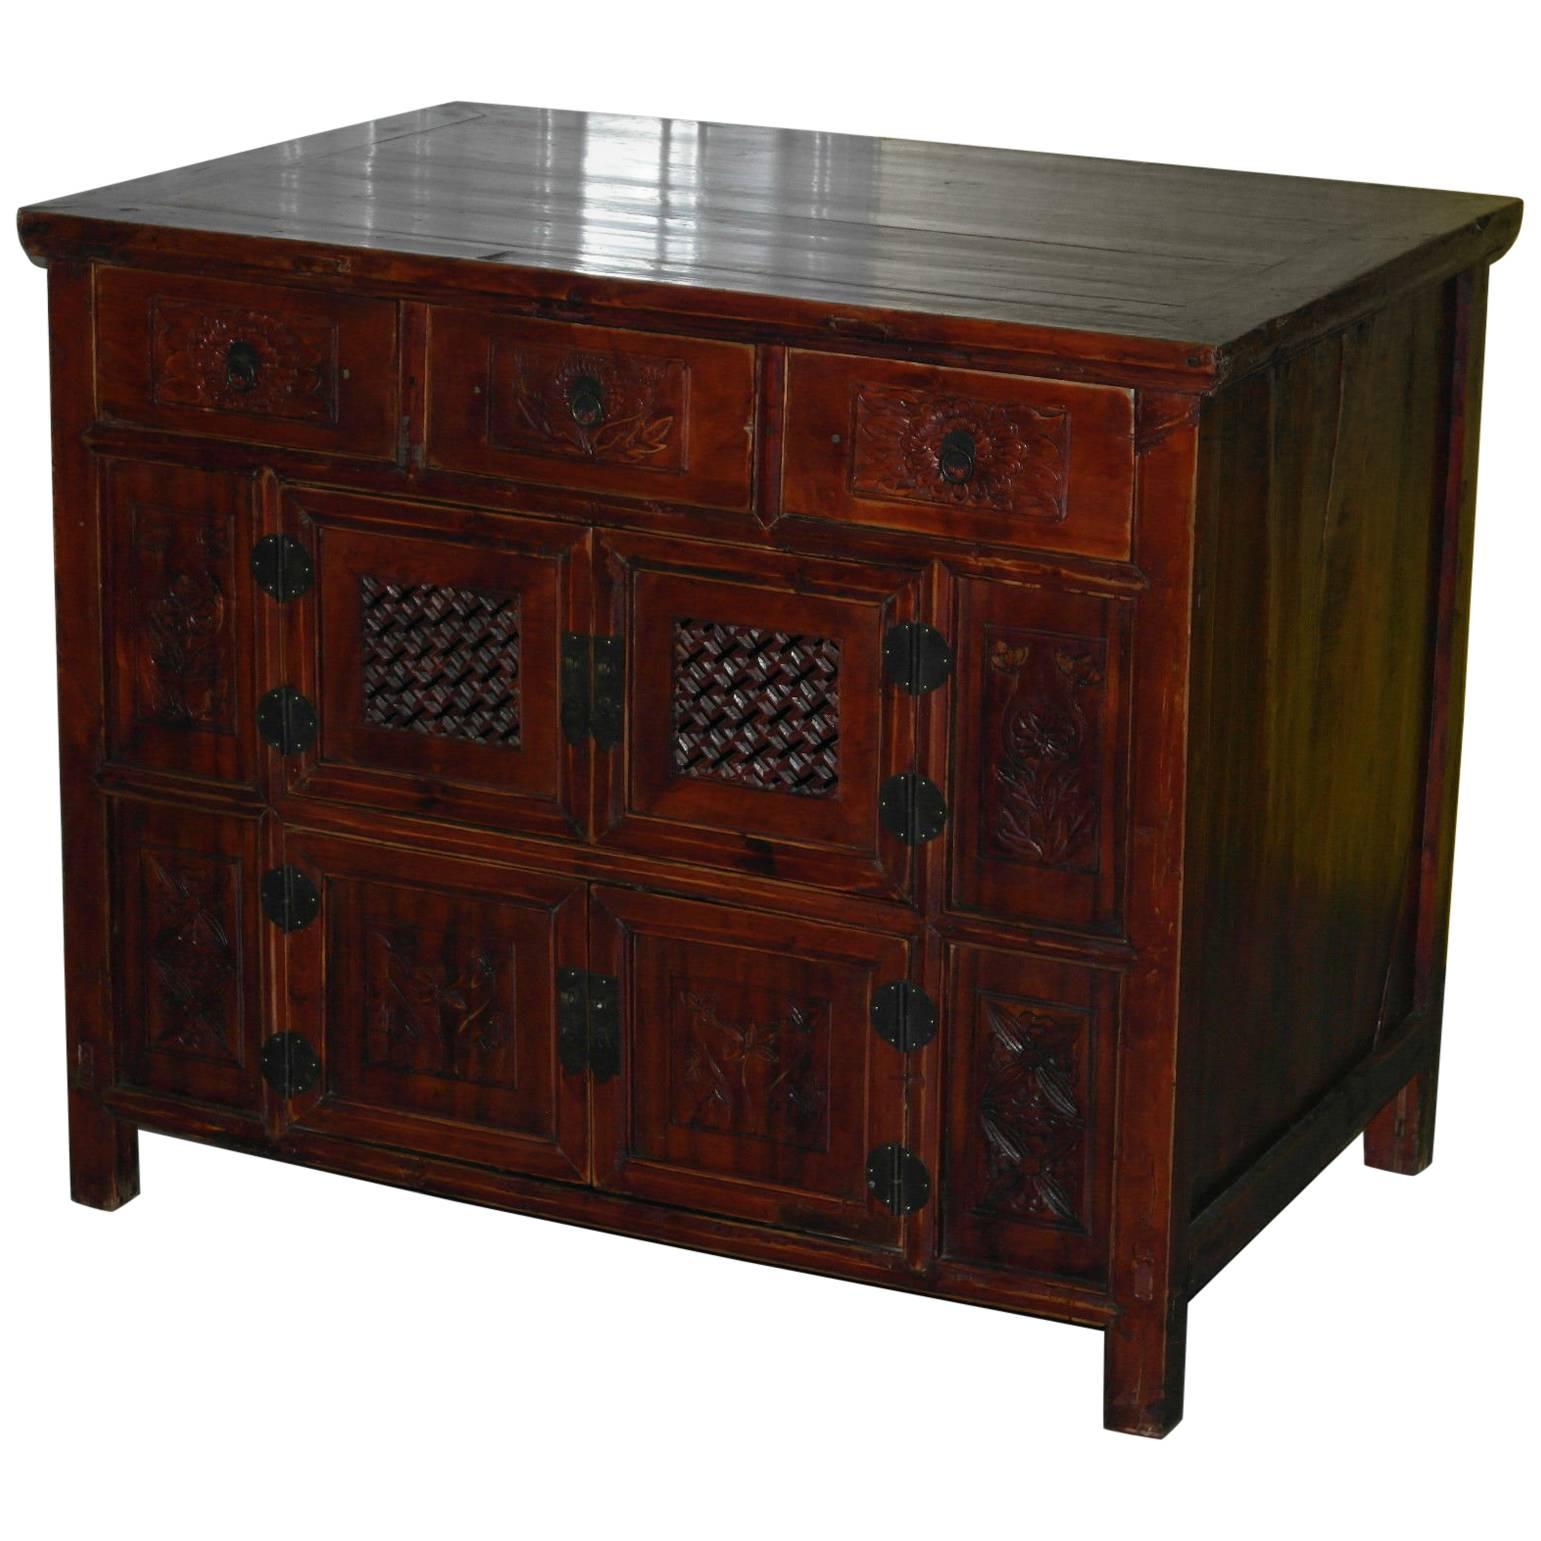 Chinese Redwood Antique Style Very Deep Sideboard Drawers Entertainment Stand